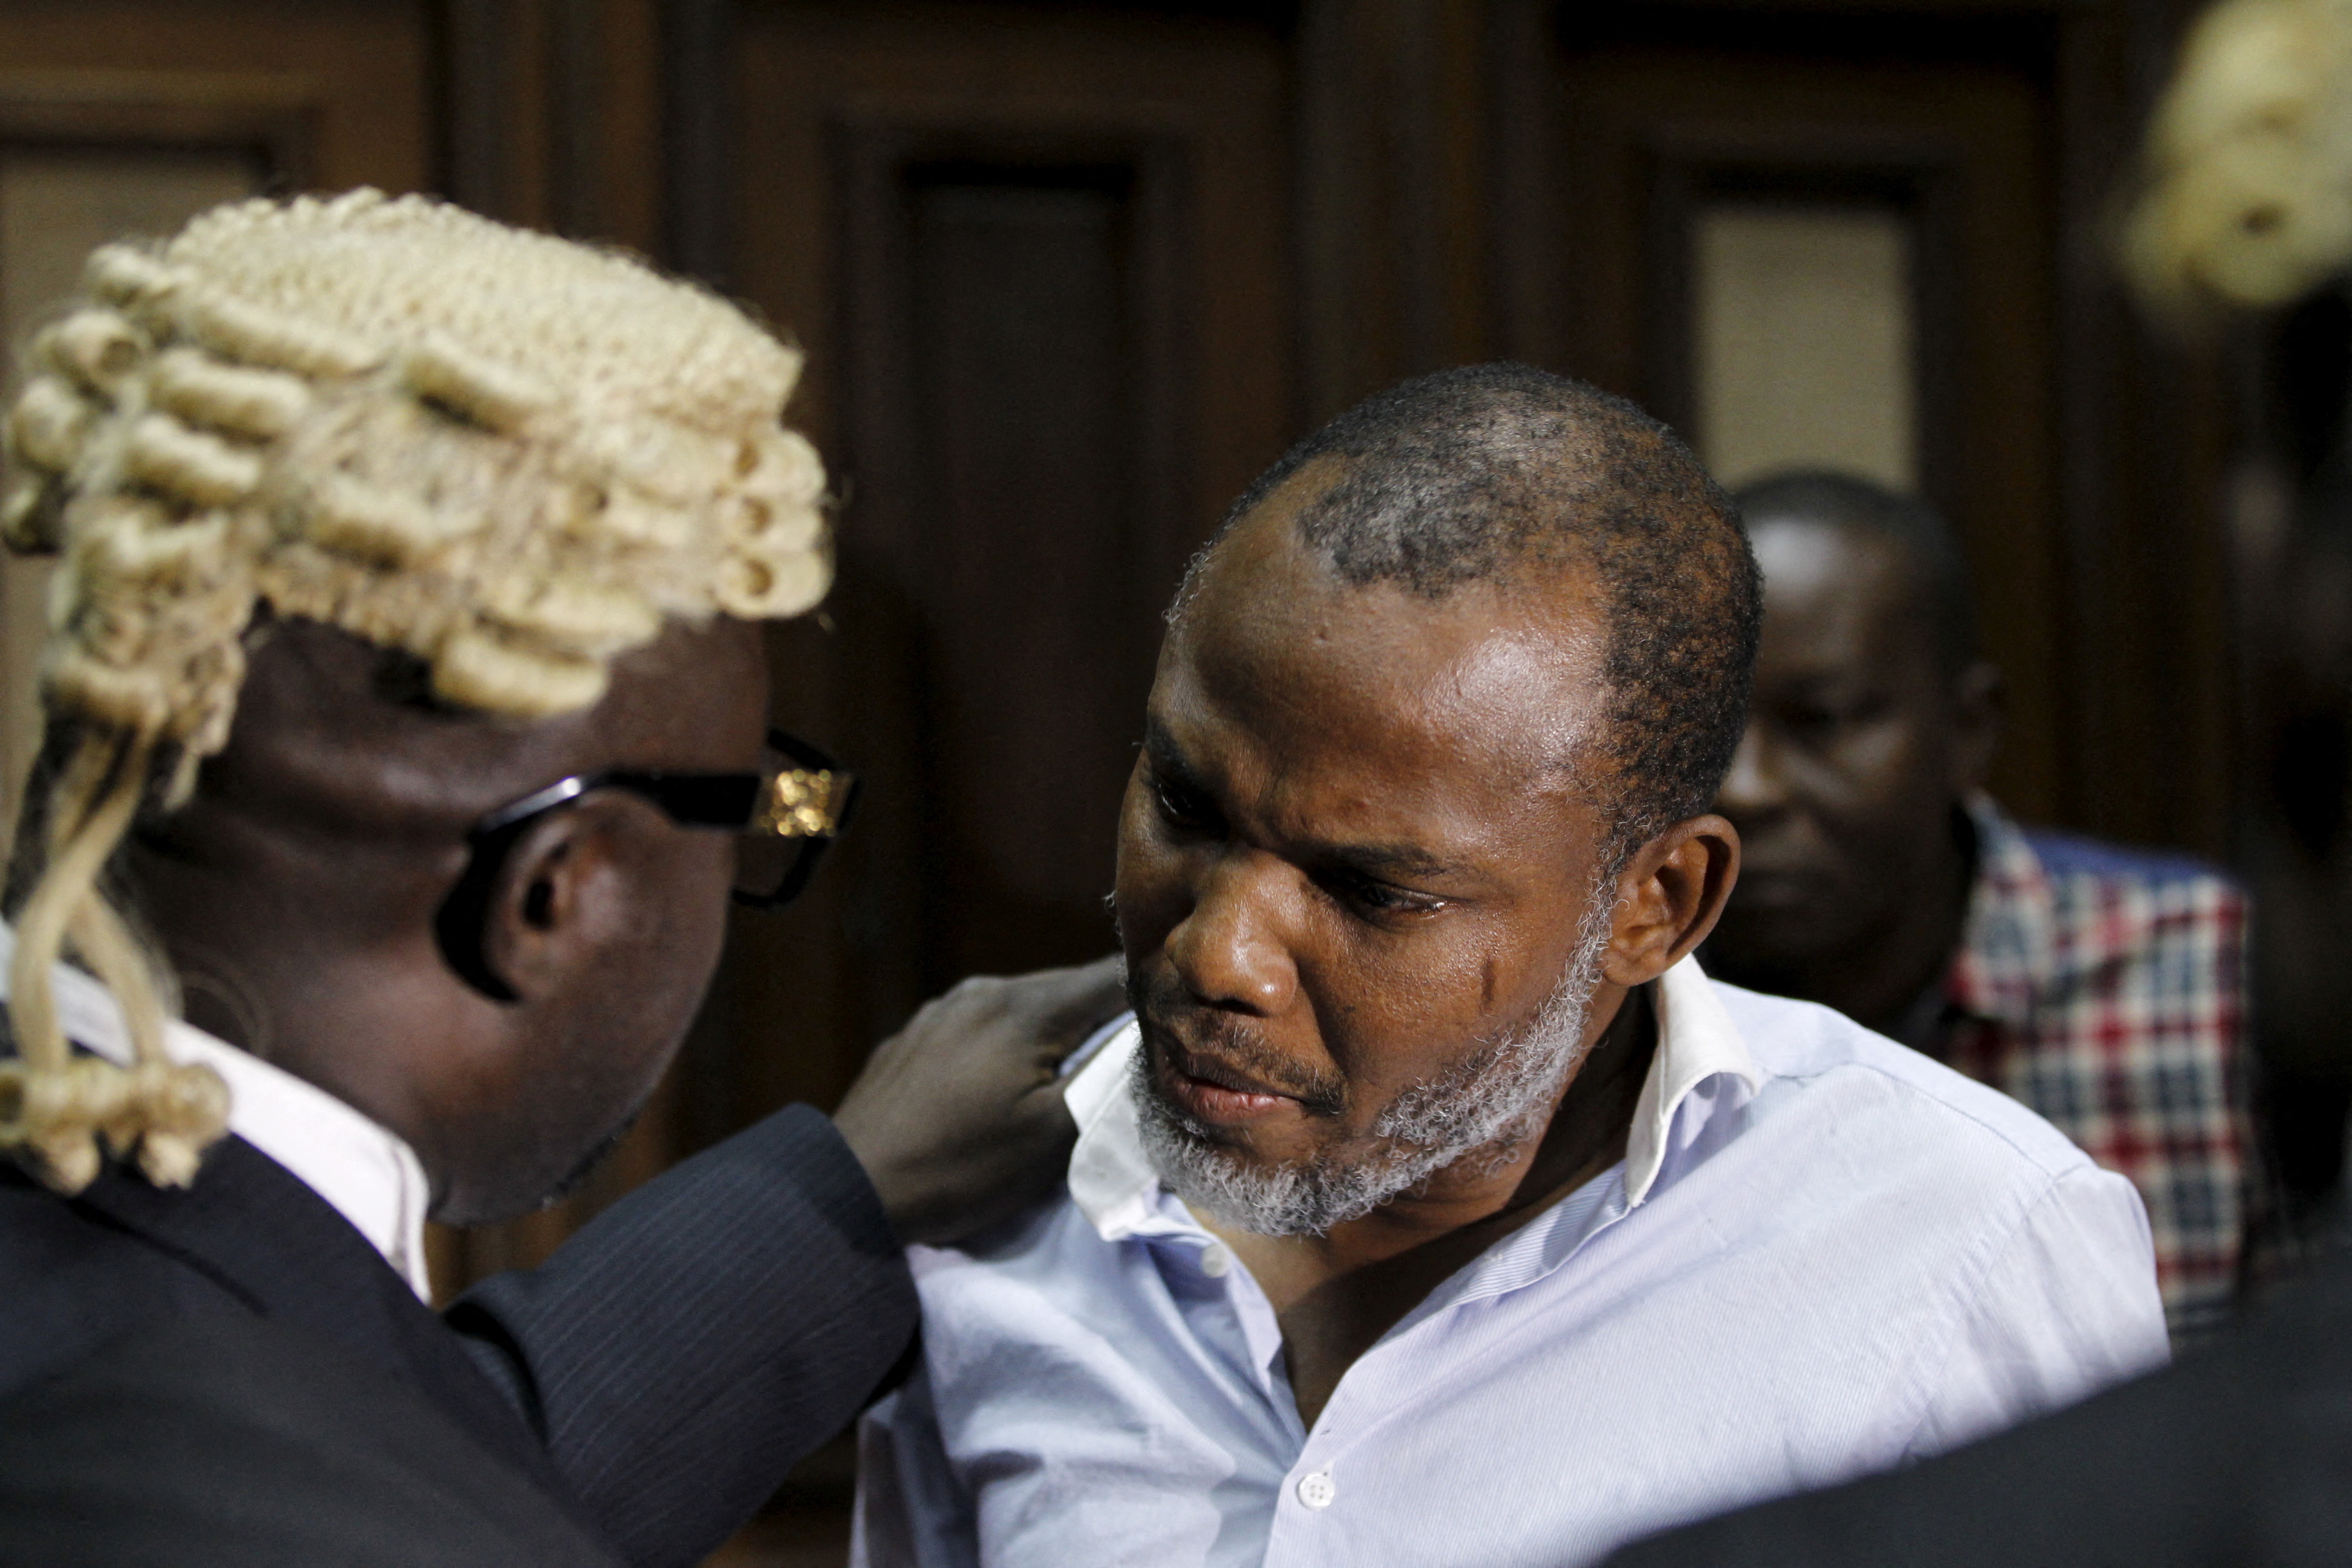 Indigenous People of Biafra (IPOB) leader Nnamdi Kanu is seen with his counsel at the Federal high court Abuja, Nigeria January 20, 2016. REUTERS/Afolabi Sotunde/File Photo